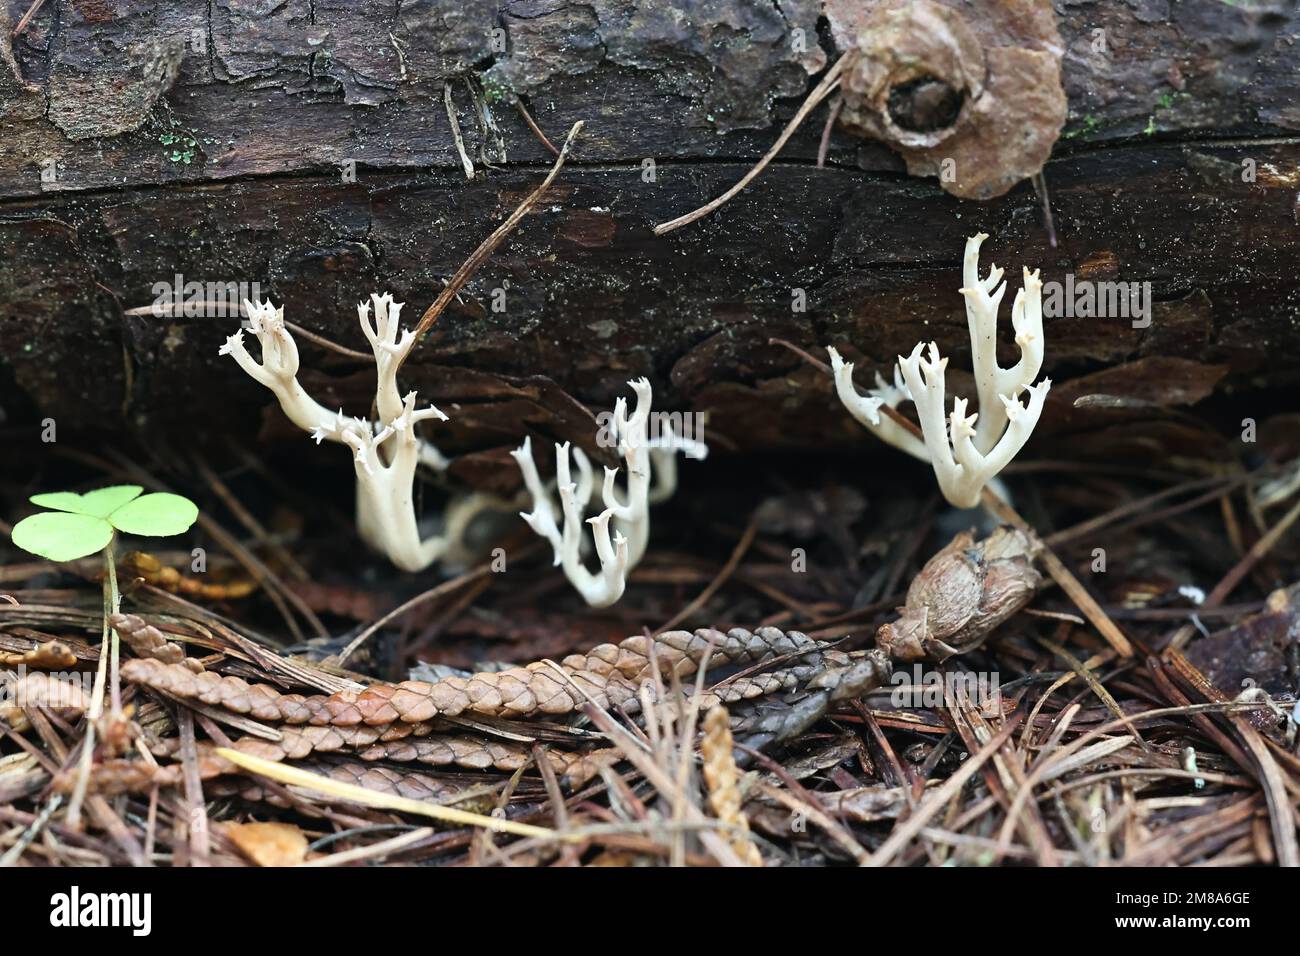 Lentaria afflata, coral fungus from Finland, no common English name Stock Photo